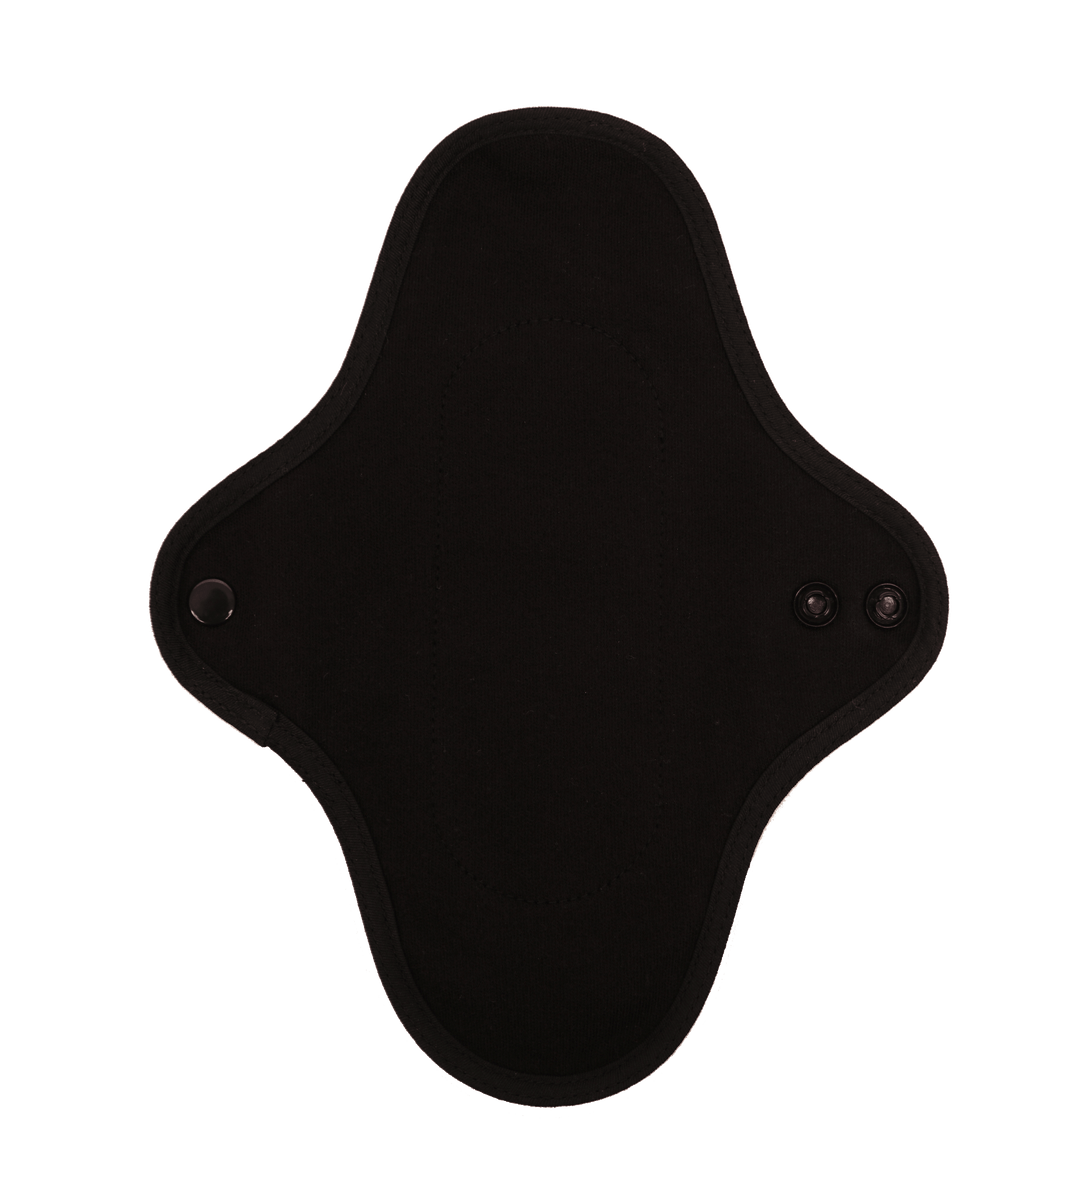 Organic Reusable Pads - 3 Pantyliners in Black - The Brand hannah